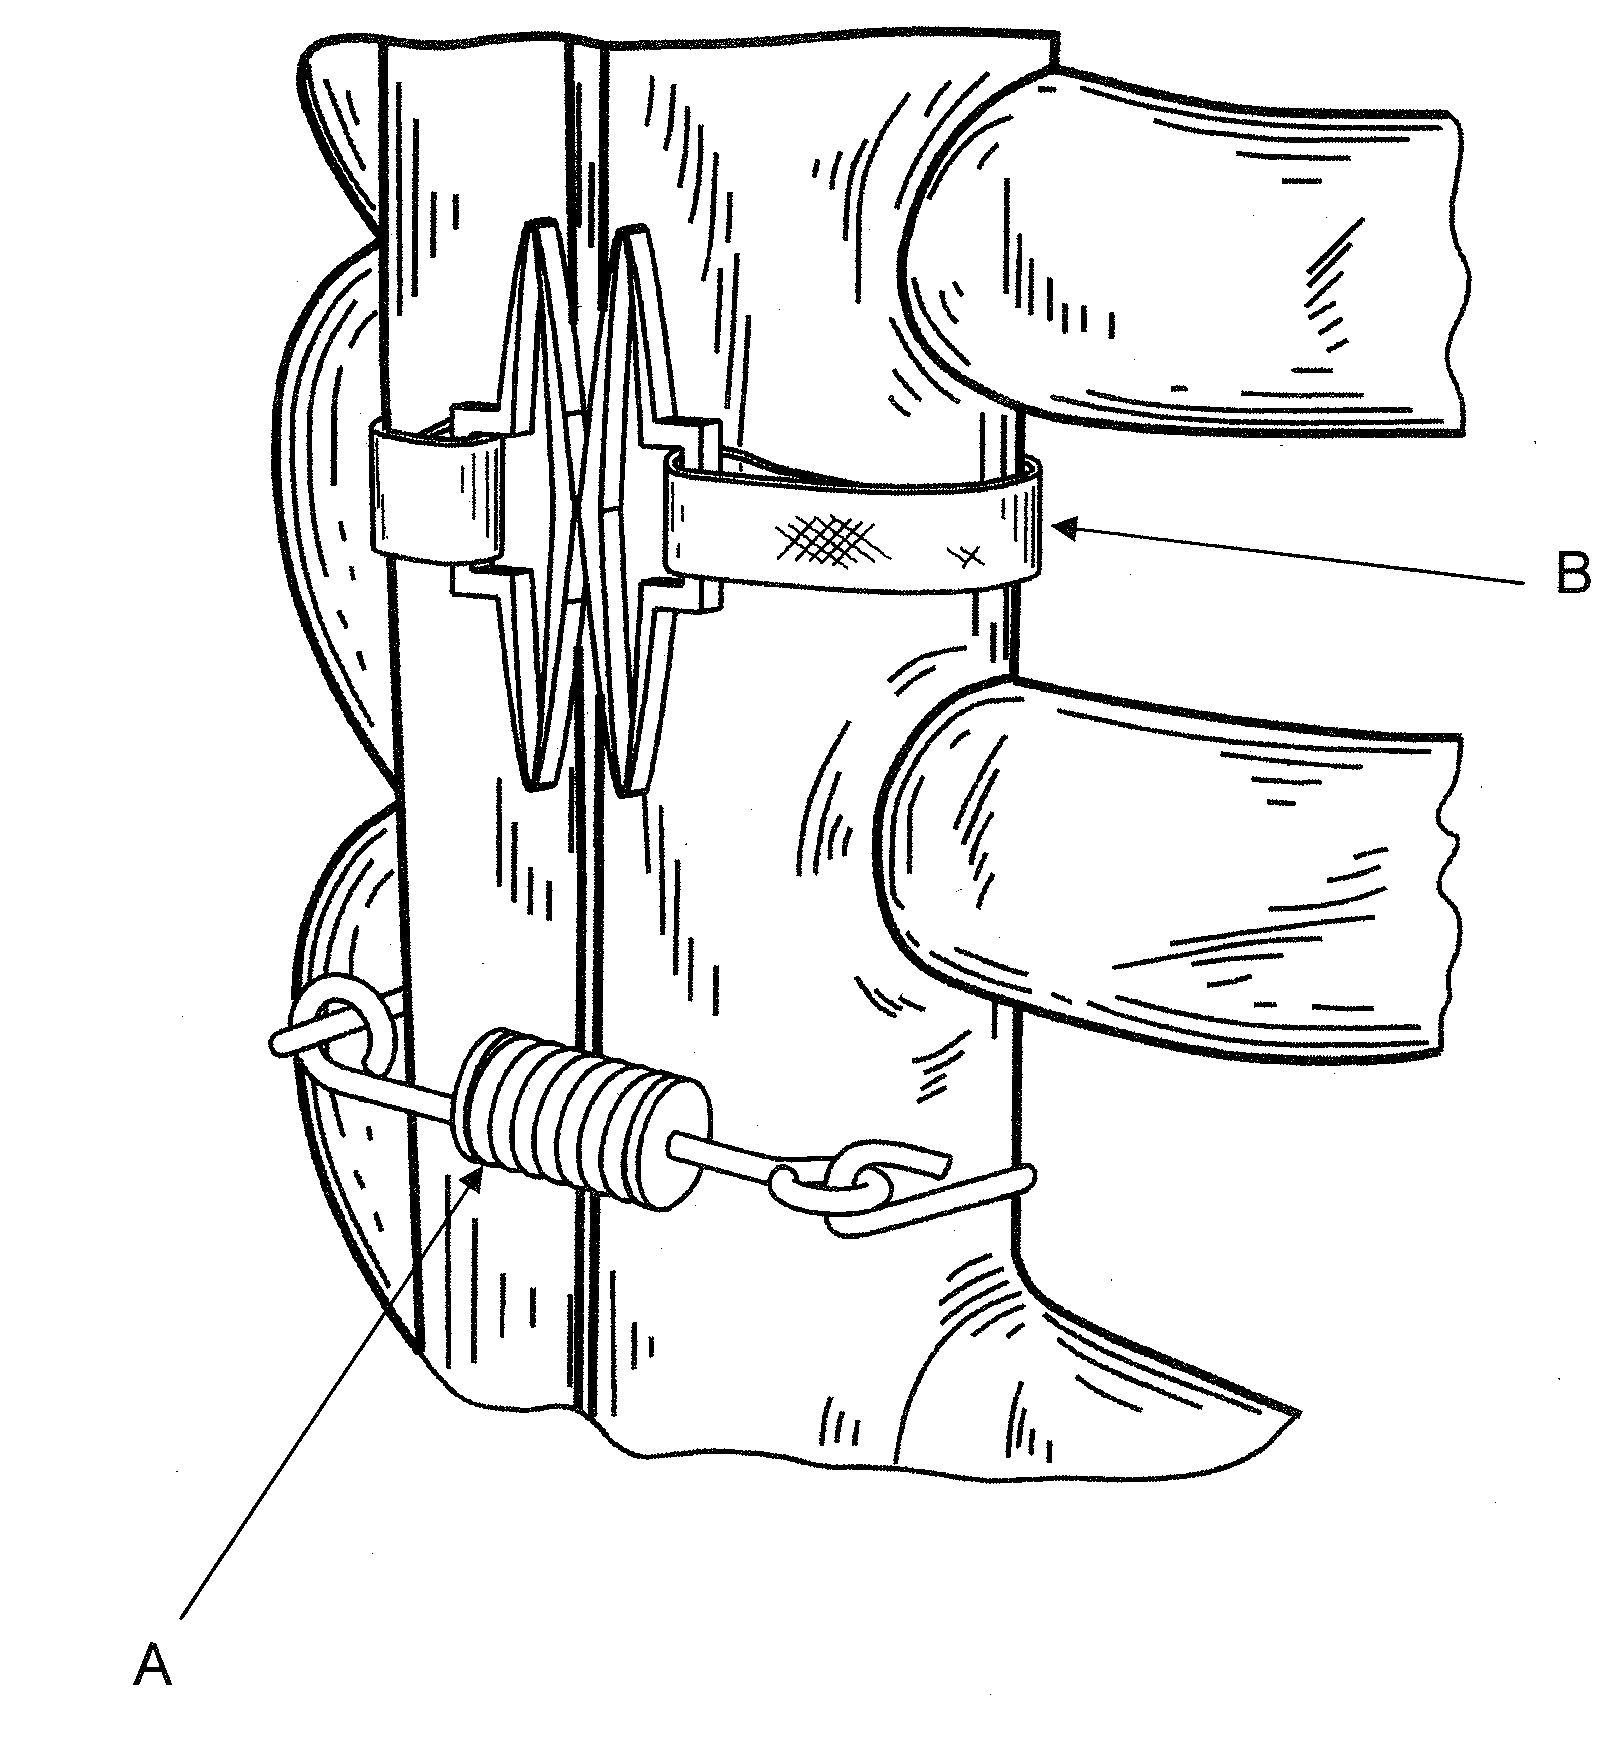 Flat suture banding system and methods